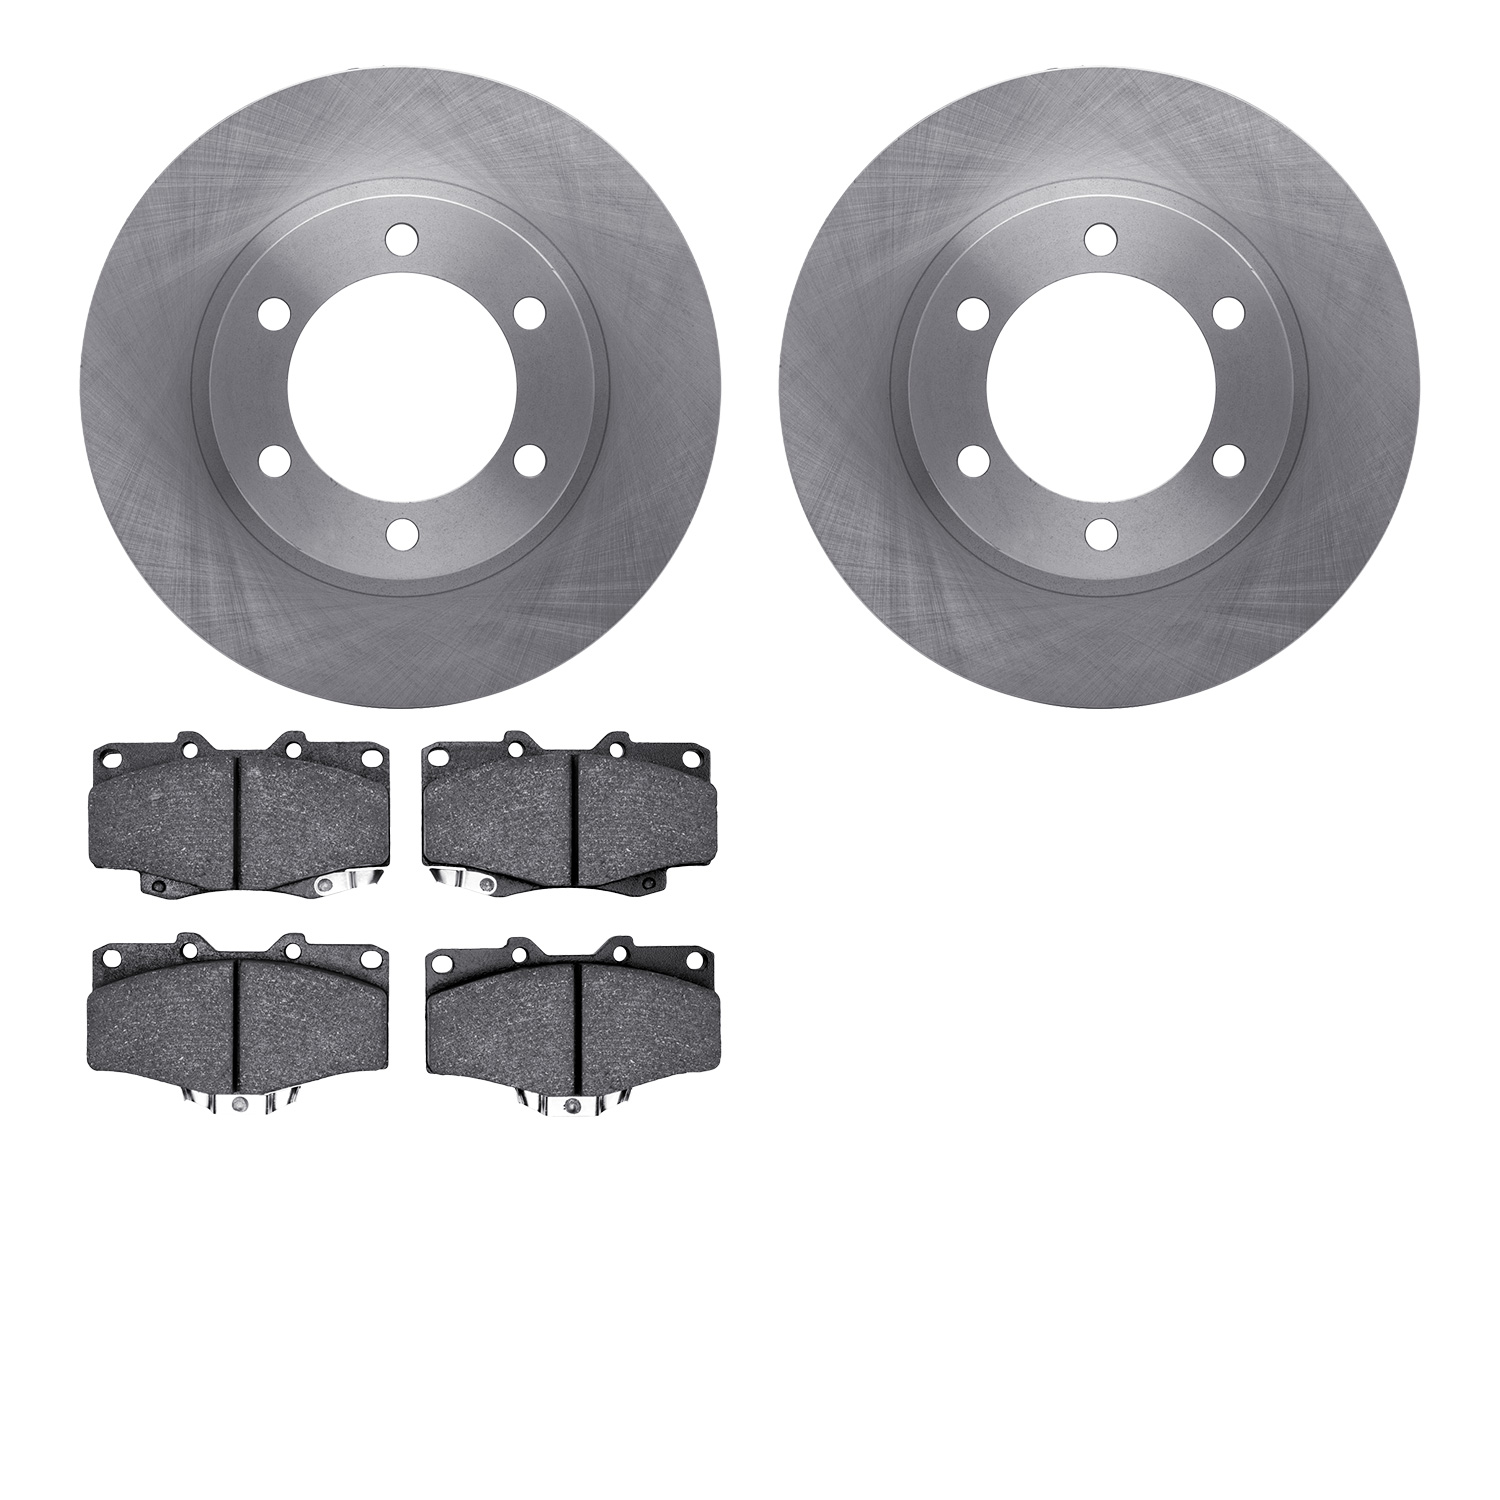 6402-76037 Brake Rotors with Ultimate-Duty Brake Pads, 1995-2004 Lexus/Toyota/Scion, Position: Front